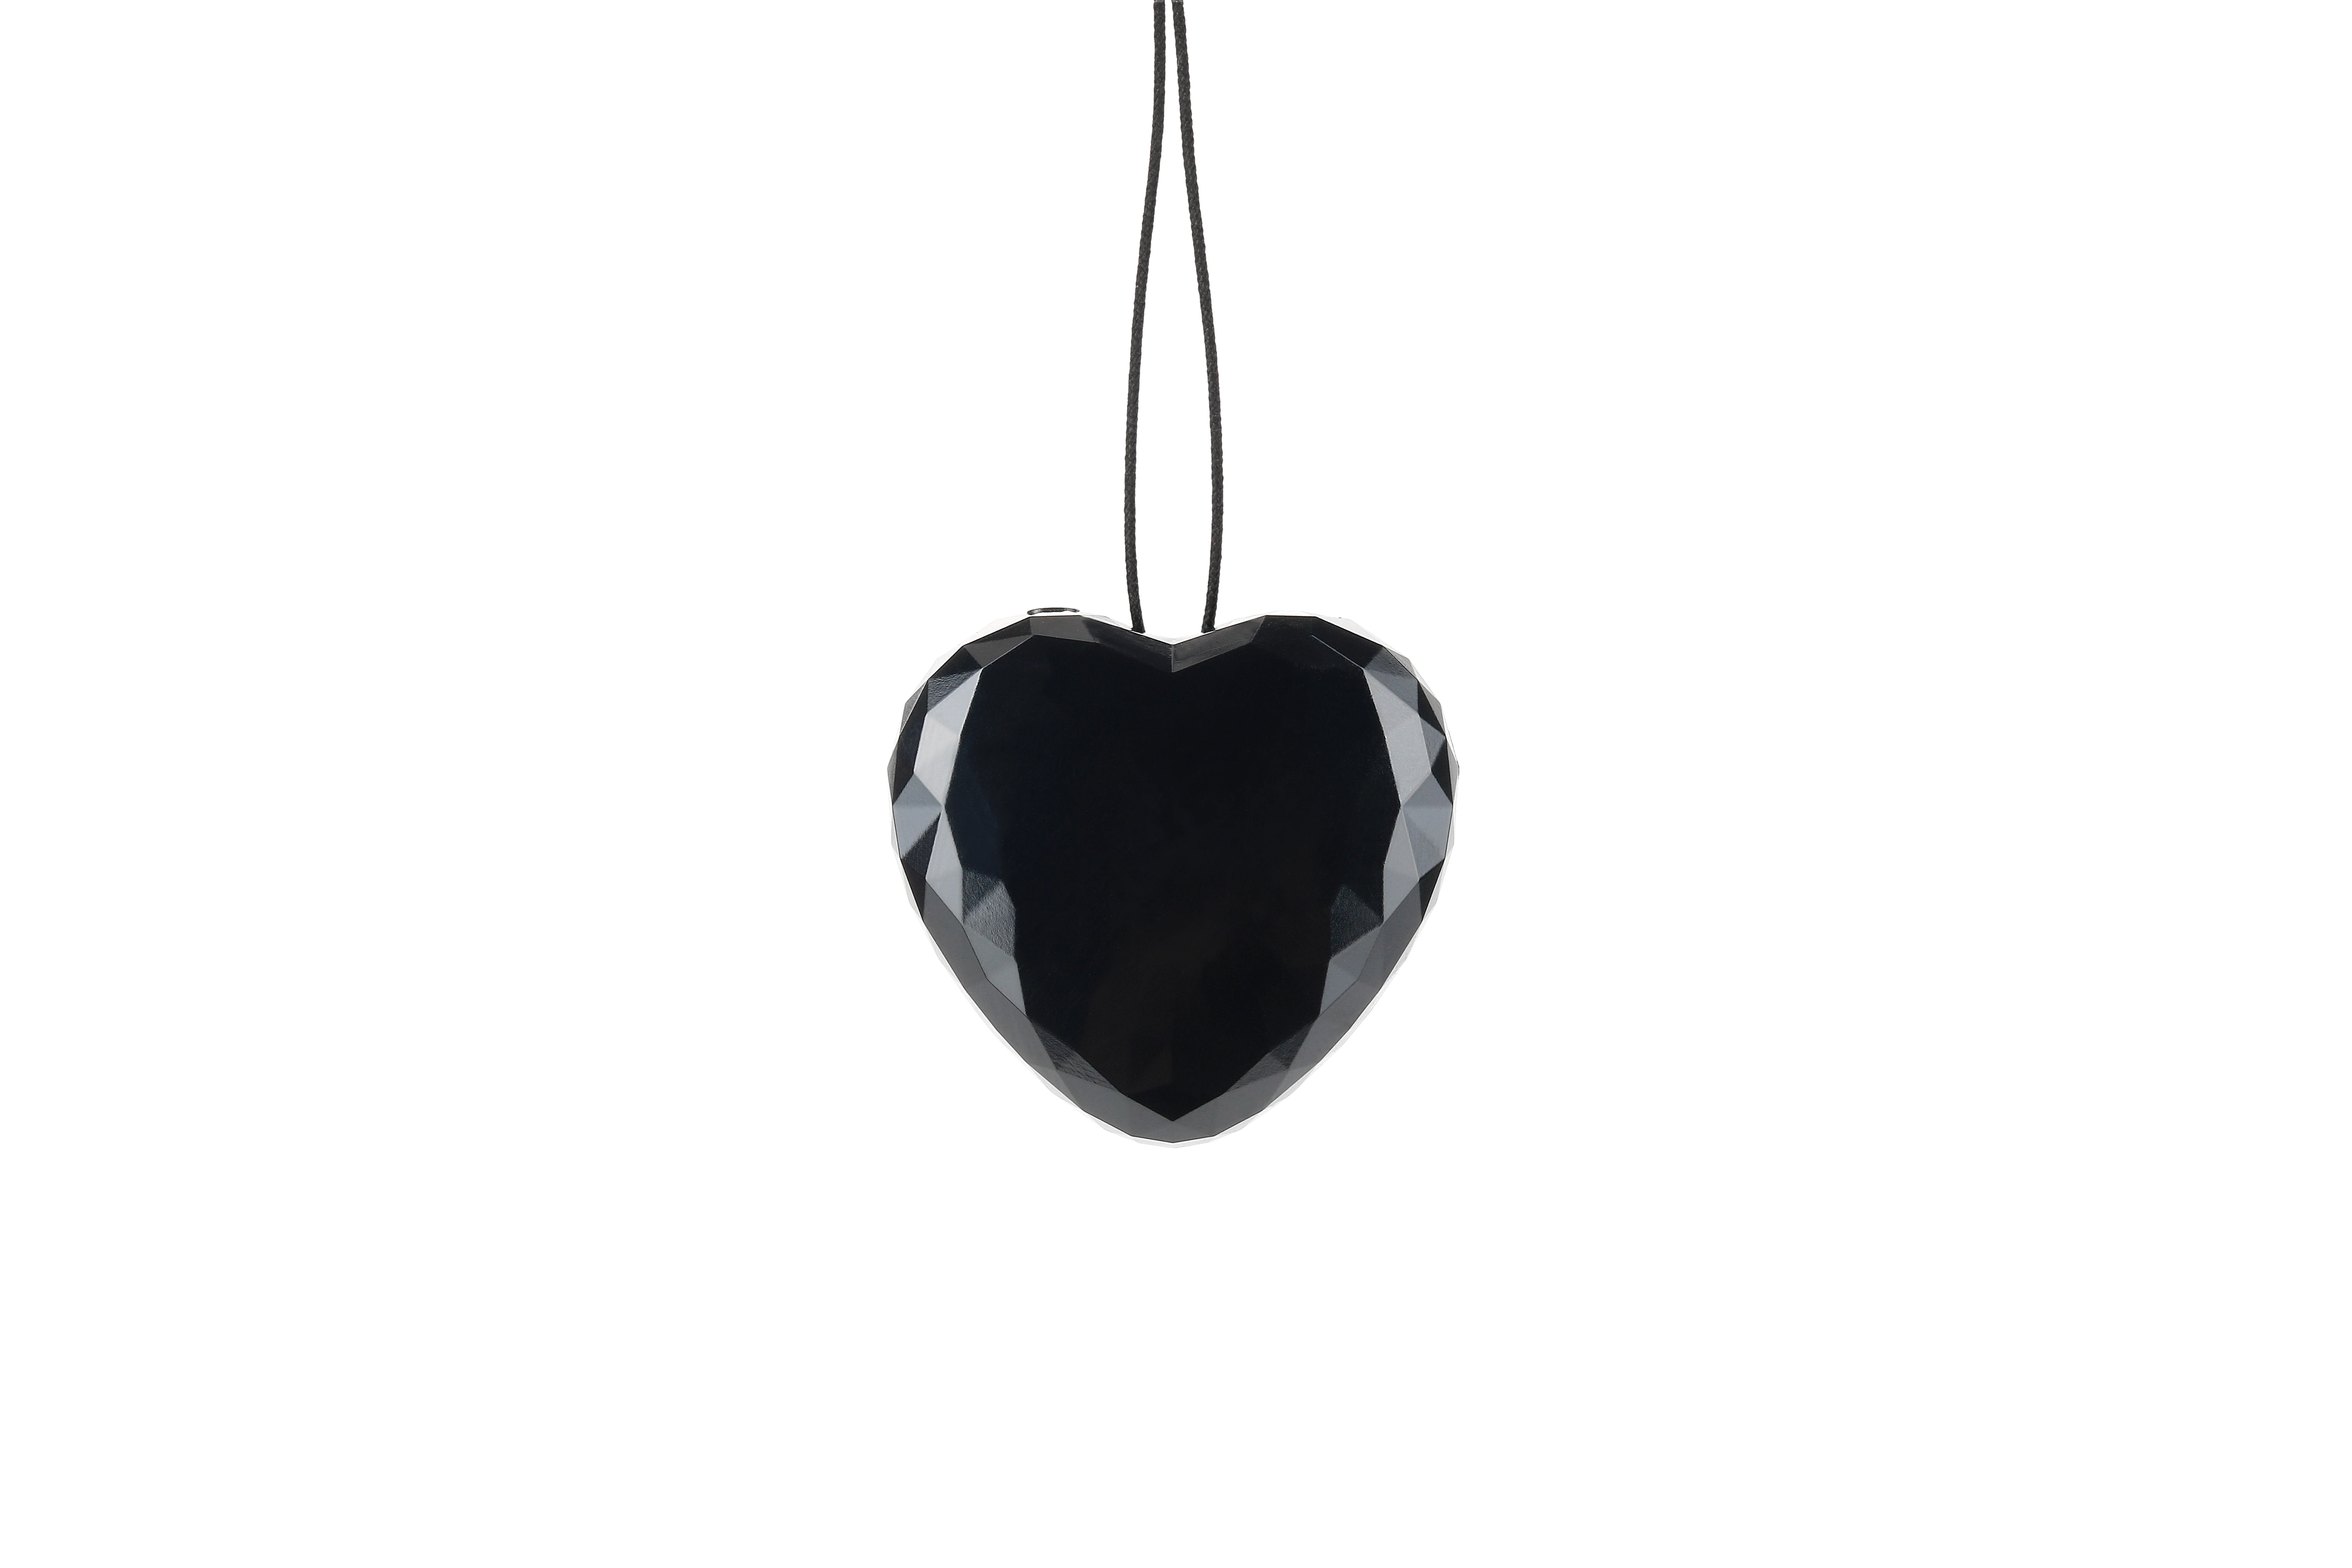 Hot Sale Heart Shaped Ornaments Voice Activated Spy Mini Audio Recorder